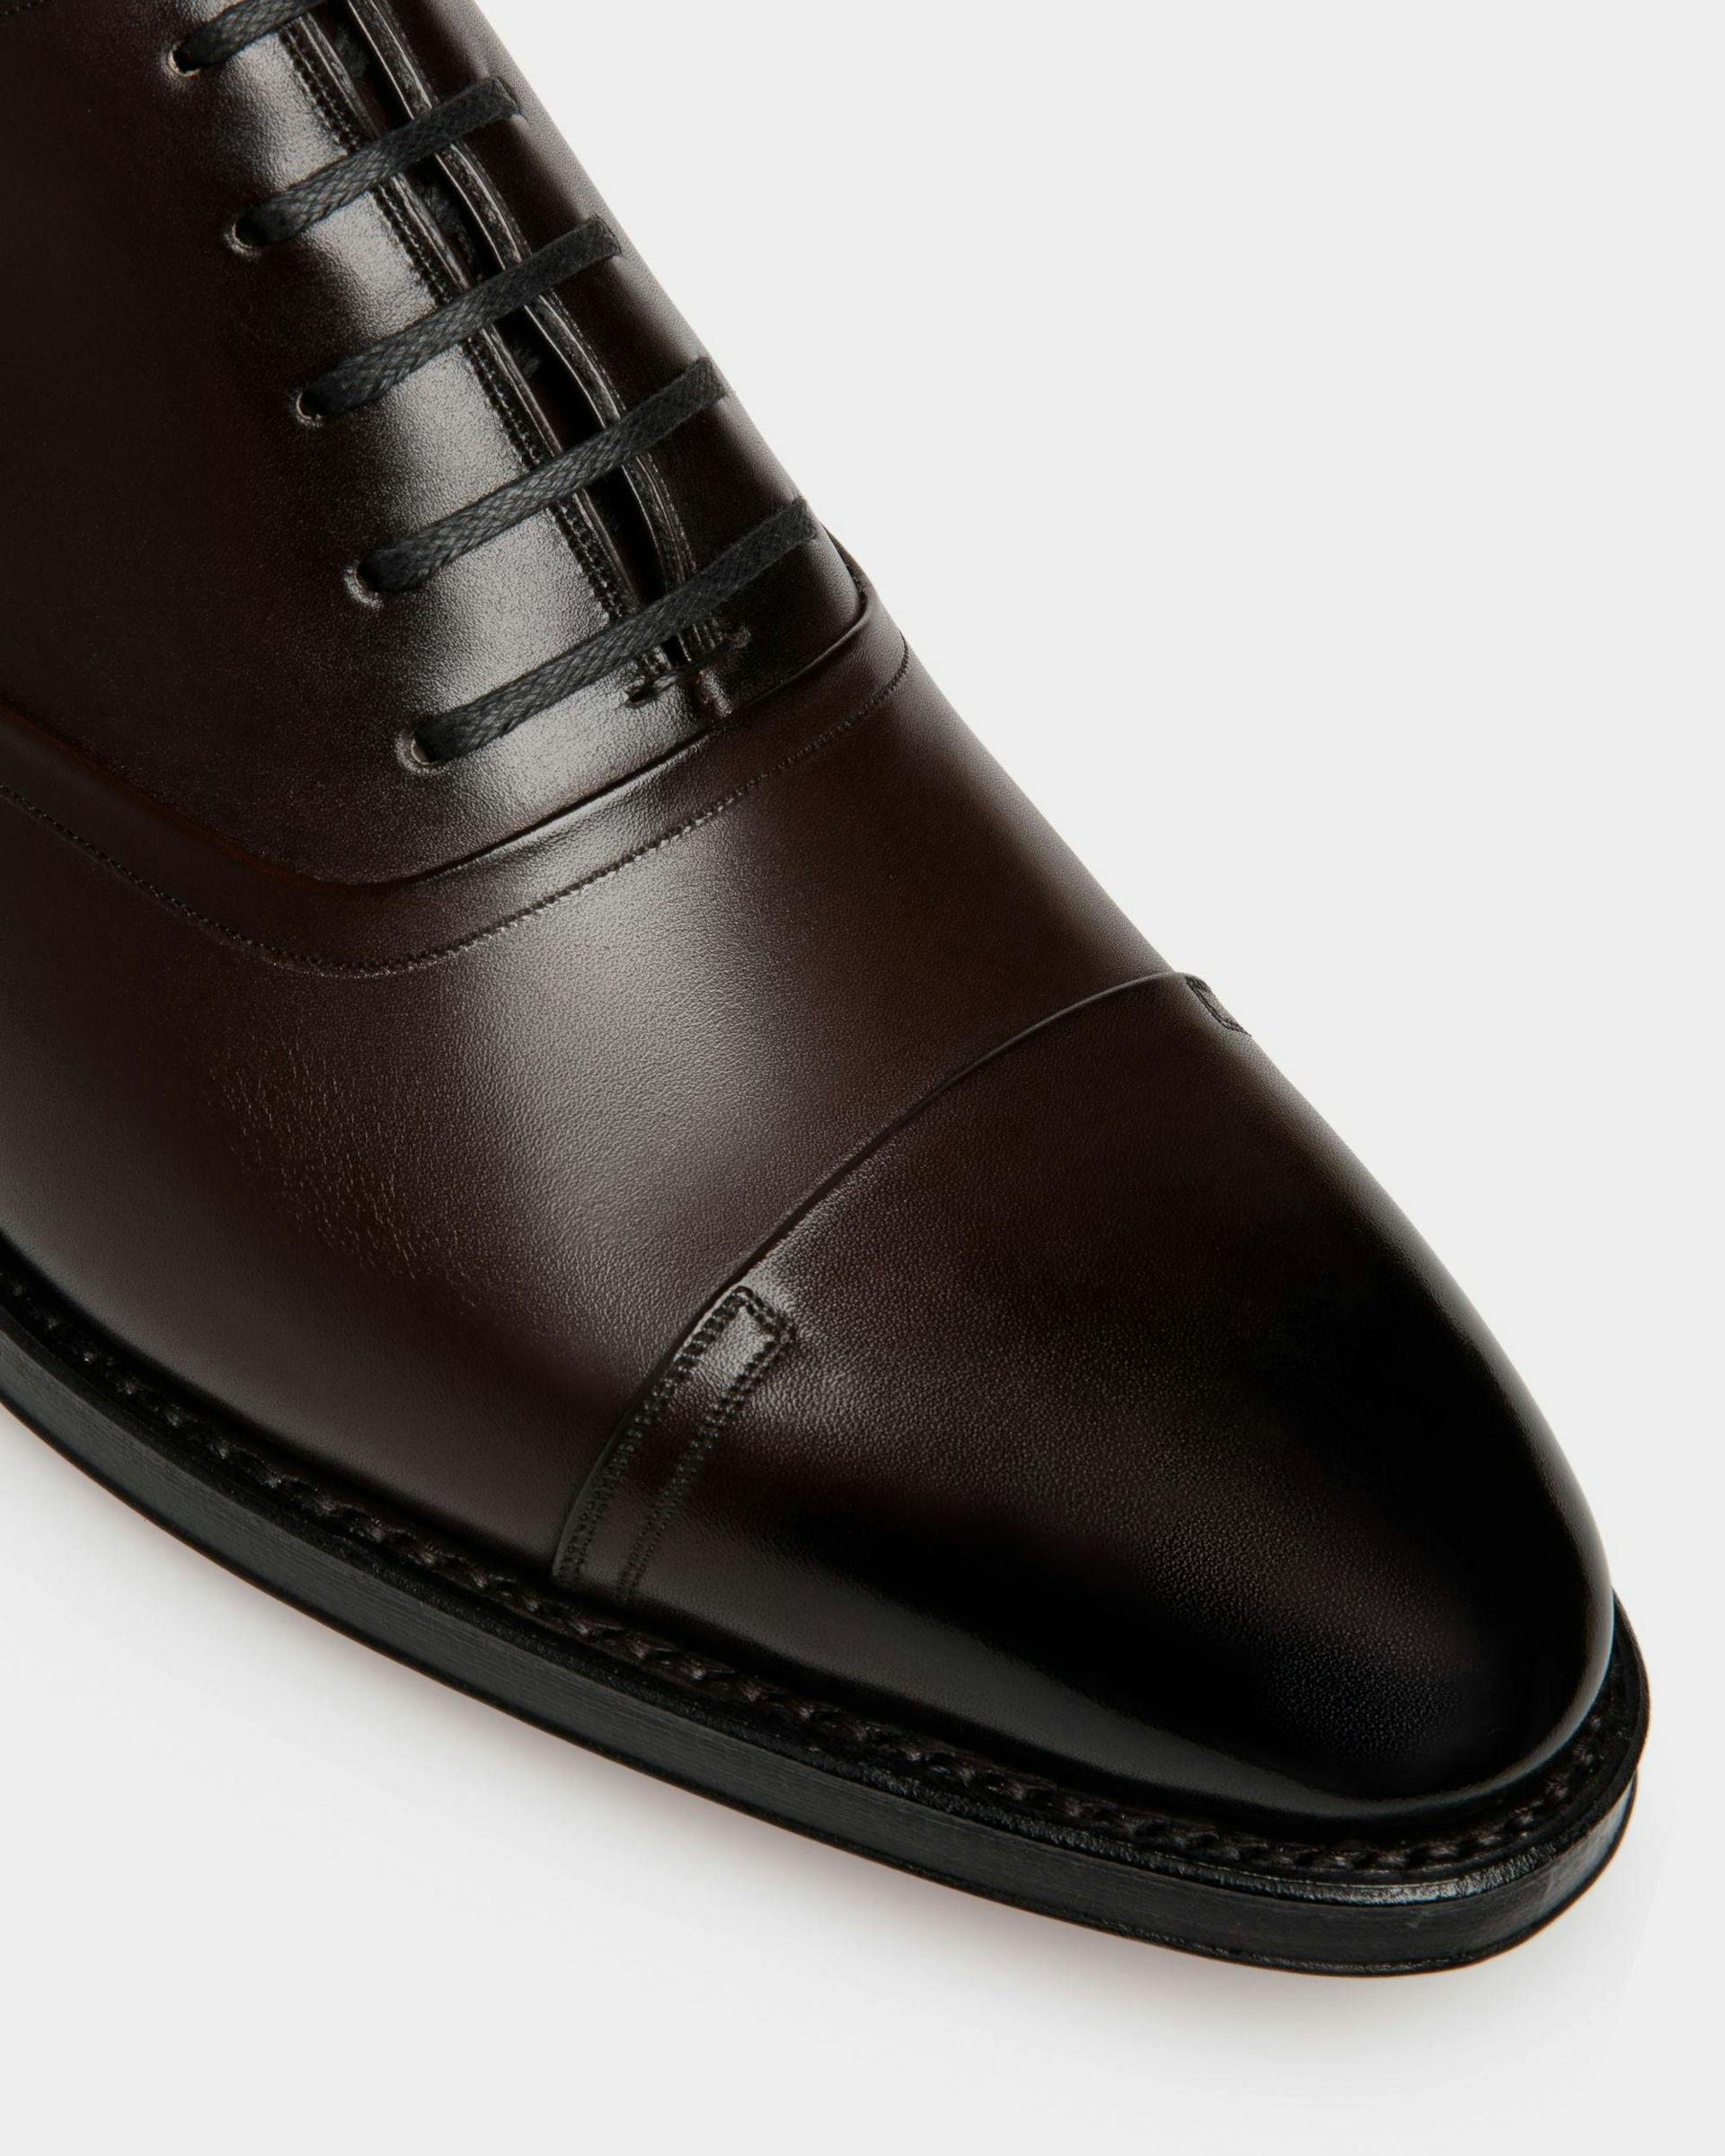 Men's Scribe Oxford Shoes In Brown Leather | Bally | Still Life Detail